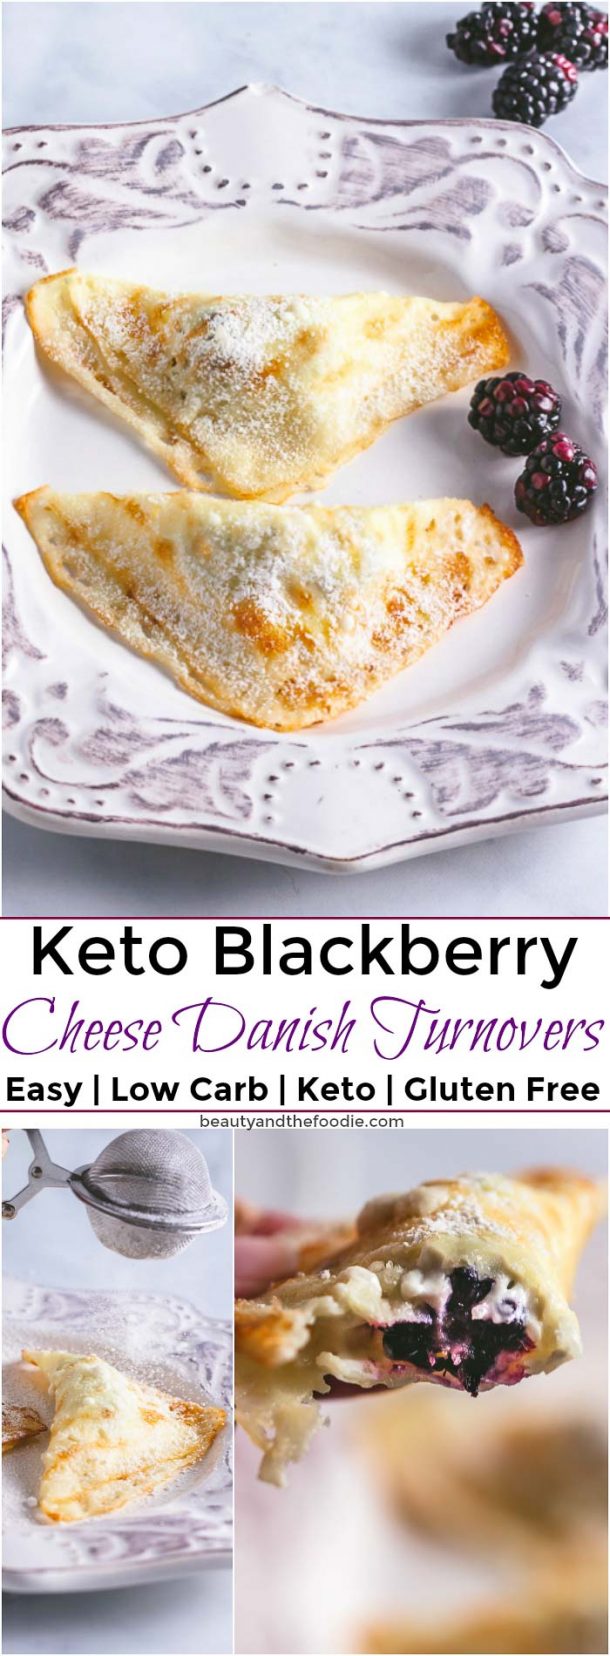 Keto Blackberry Cheese Danish Turnovers - Beauty and the Foodie